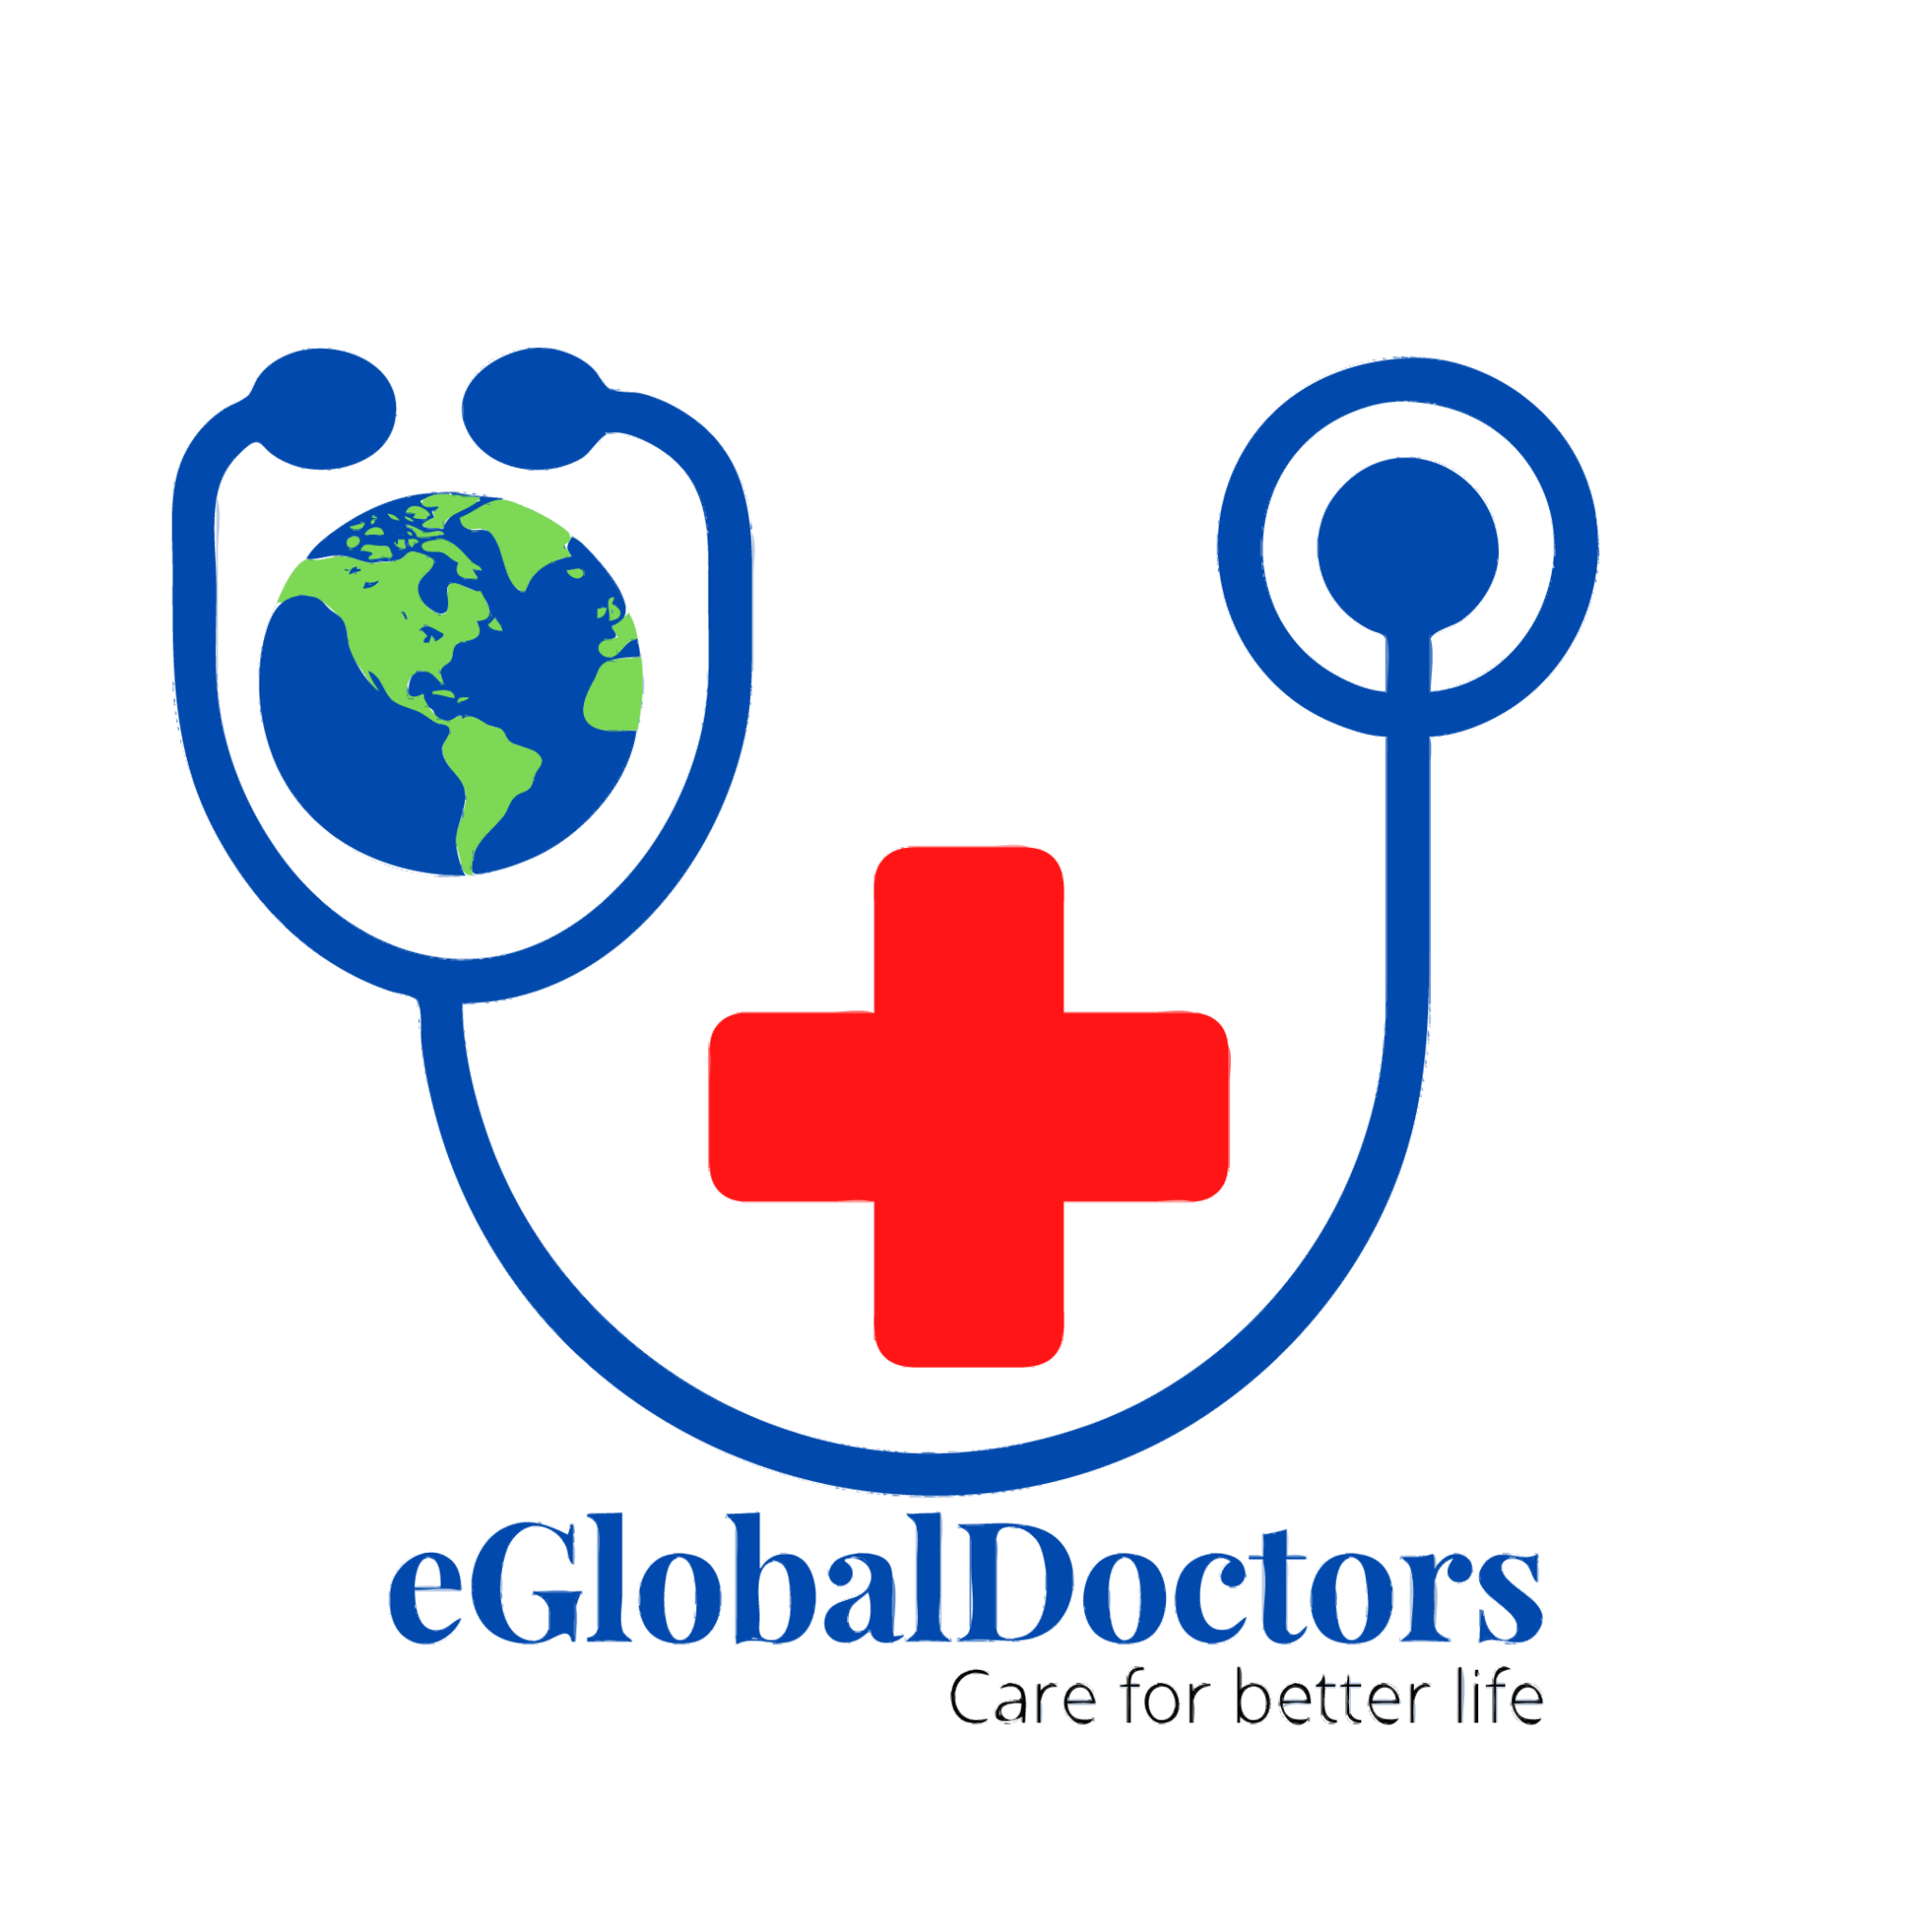 eGlobalDoctors - Online Doctor Consultation | Primary Consultations | Second Medical opinion | Multispecialty